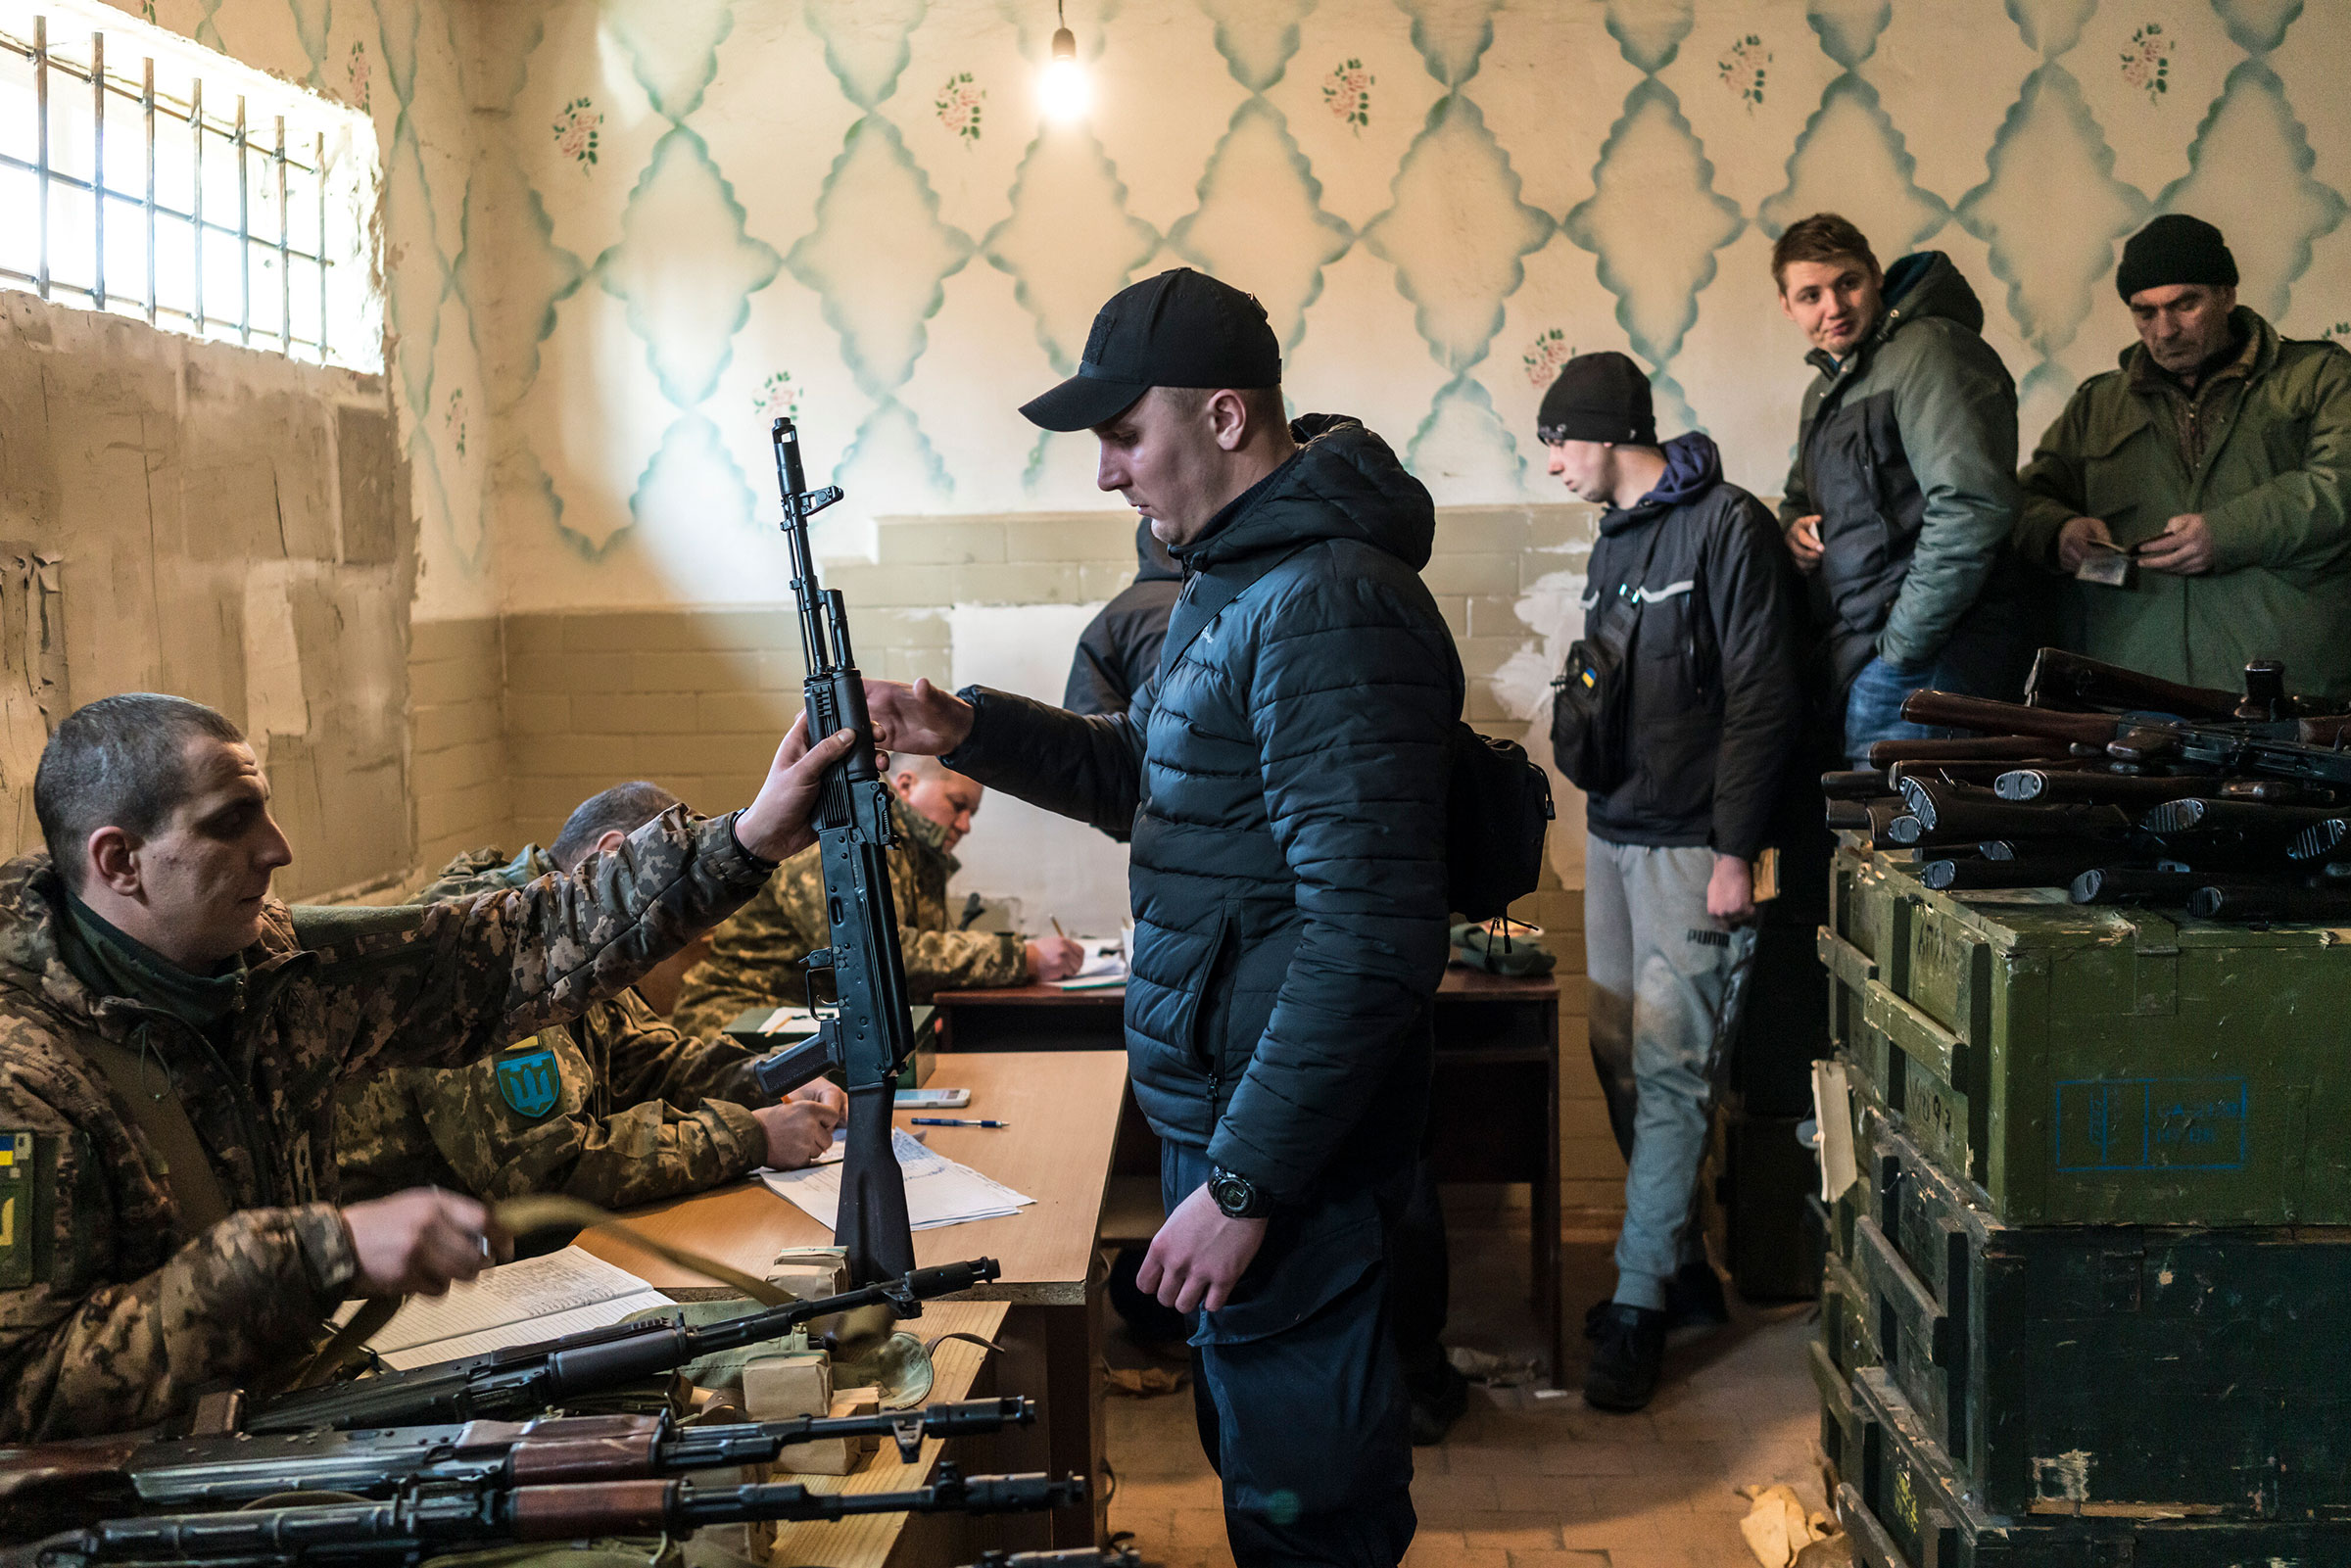 Ukrainian military volunteers receive weapons at a weapons storage facility in Fastiv, on Feb. 25.